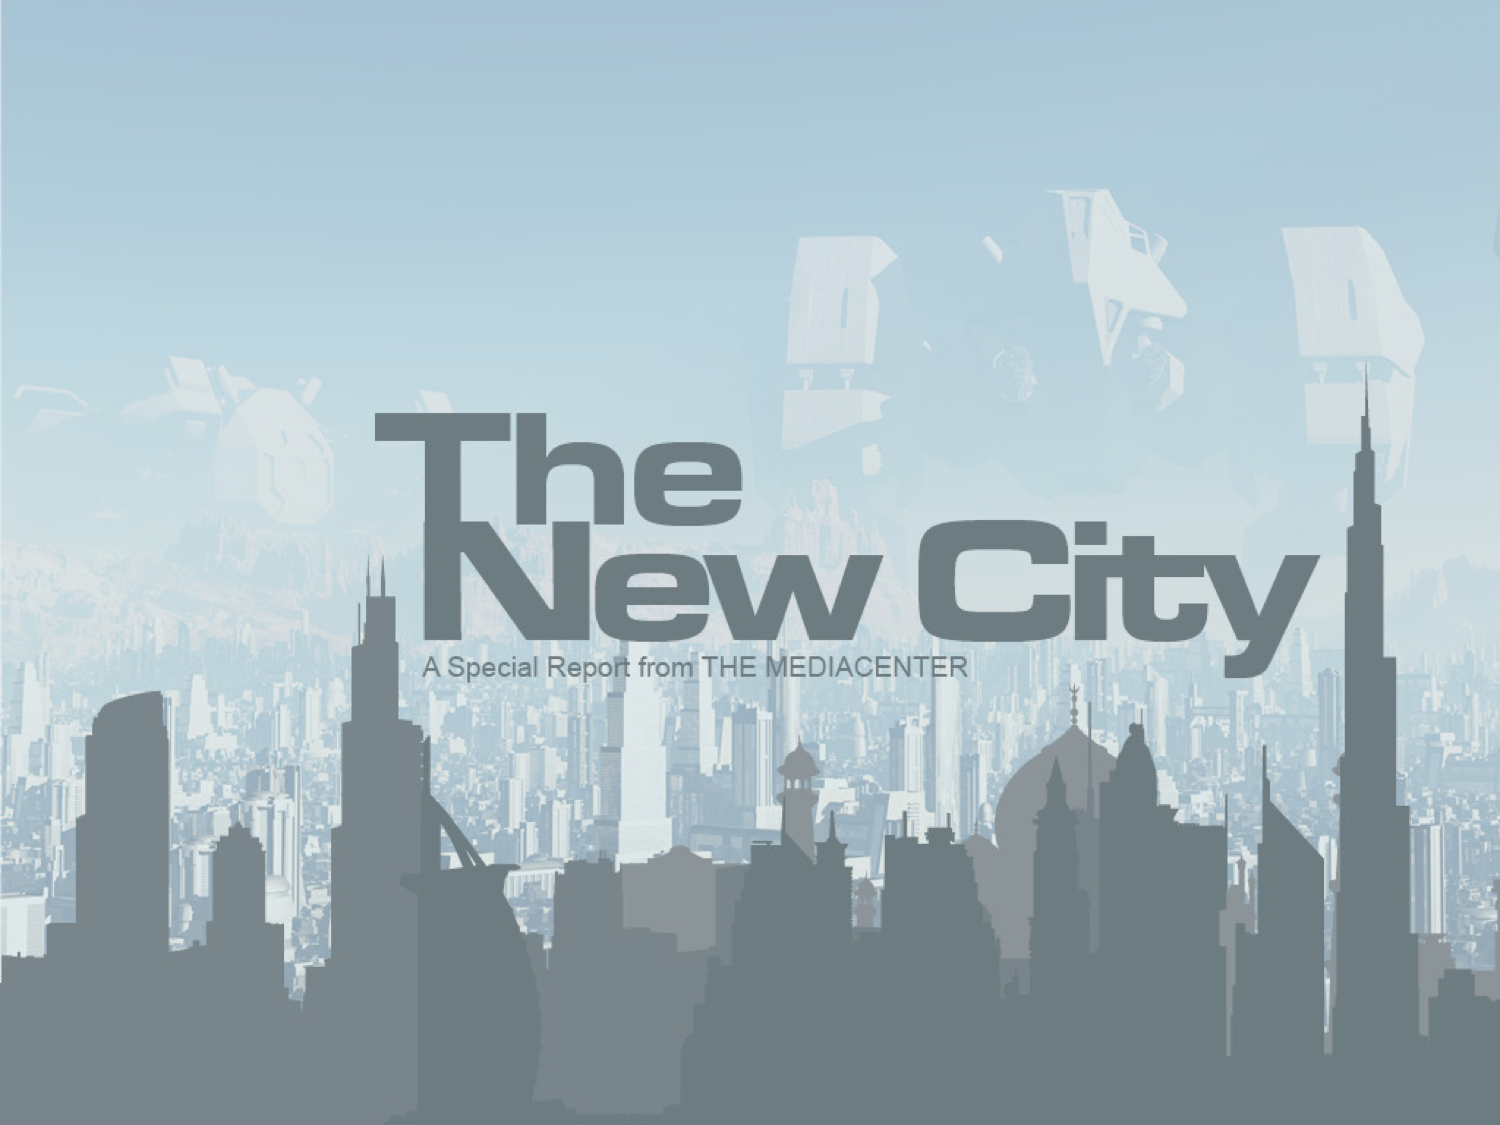 THE NEW CITY